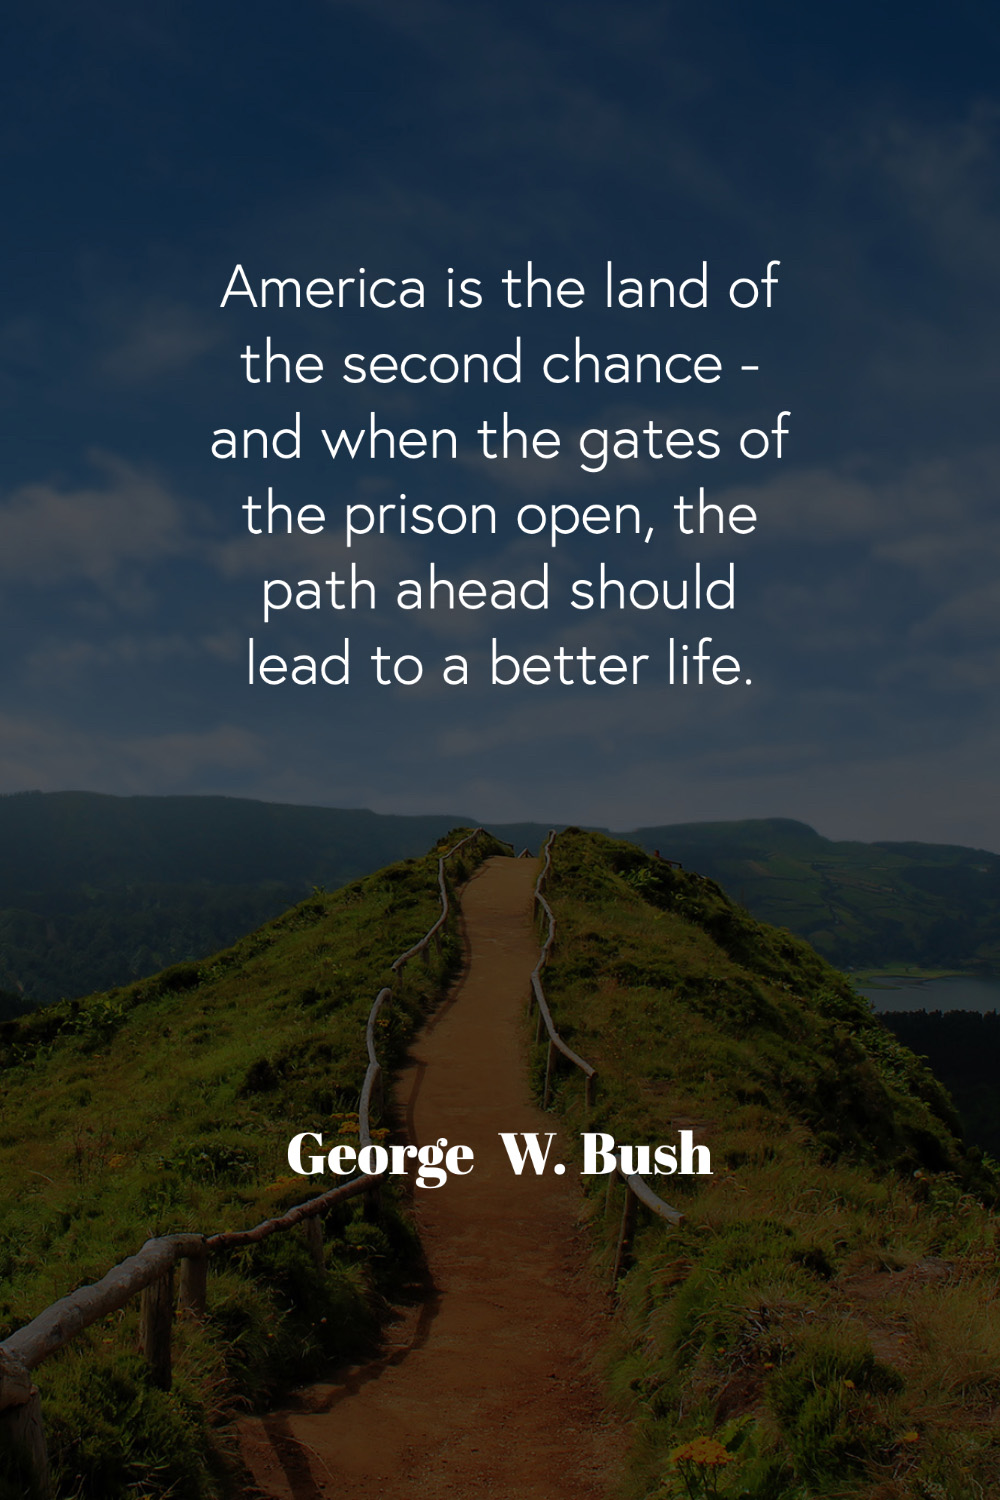 Quote by George W. Bush